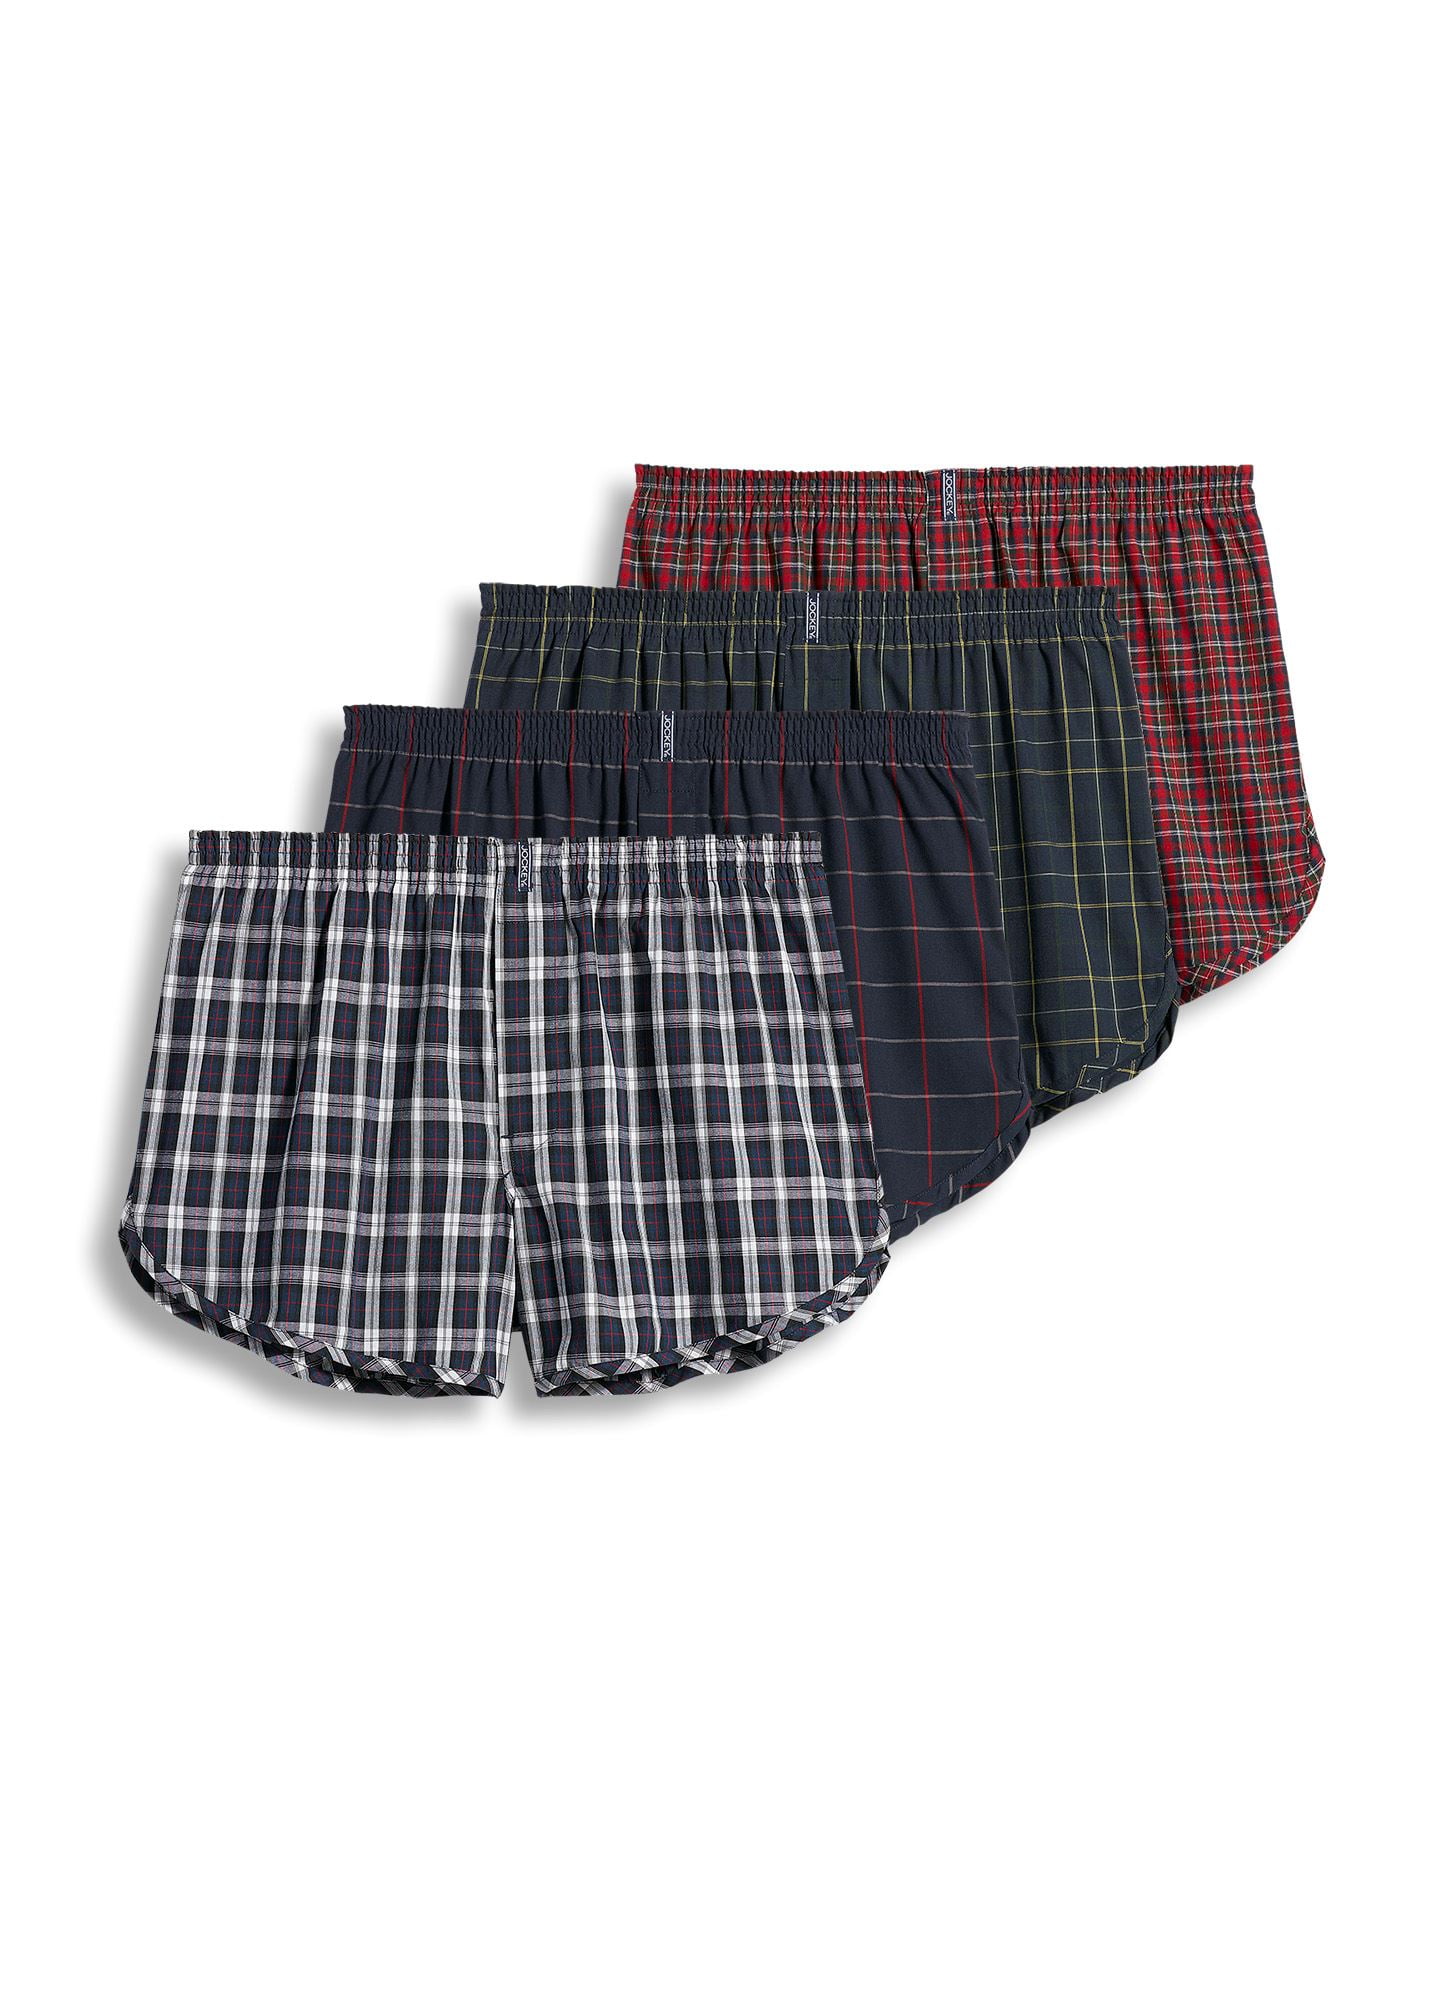 Mens 4 Pack Tapered Boxers